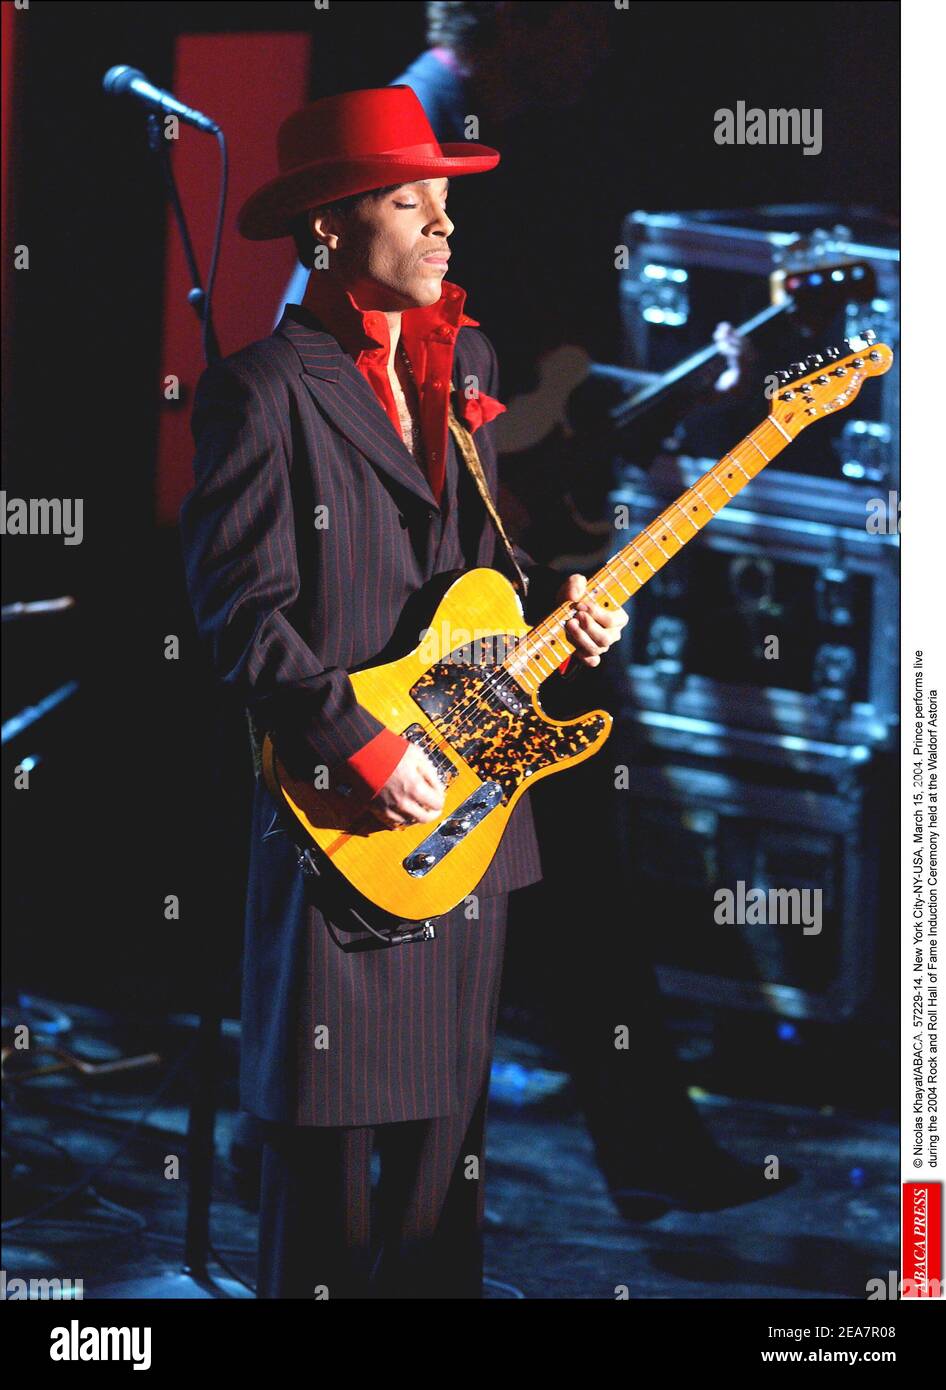 Prince performs live during the 2004 Rock and Roll Hall of Fame Induction  Ceremony held at